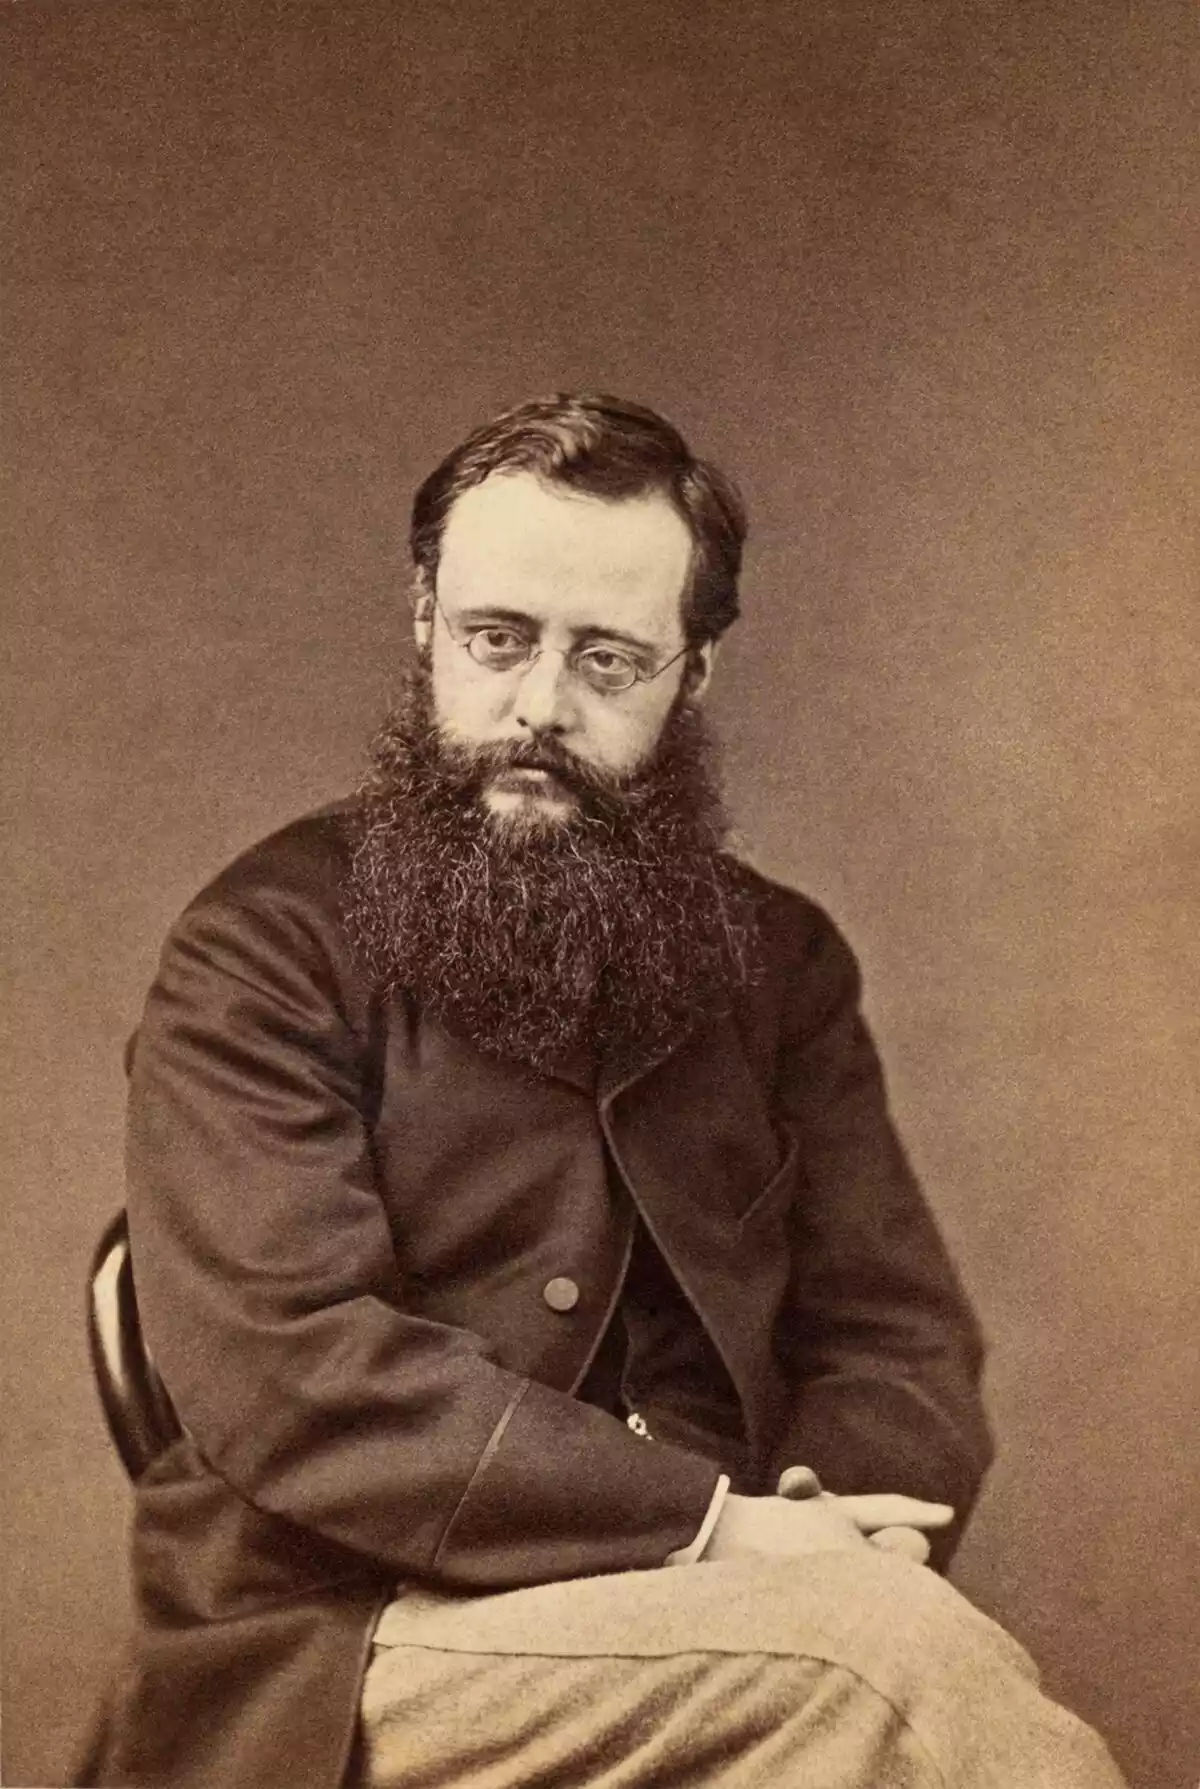 Black and white Photo of Author Wilkie Collins (1824 - 1889)